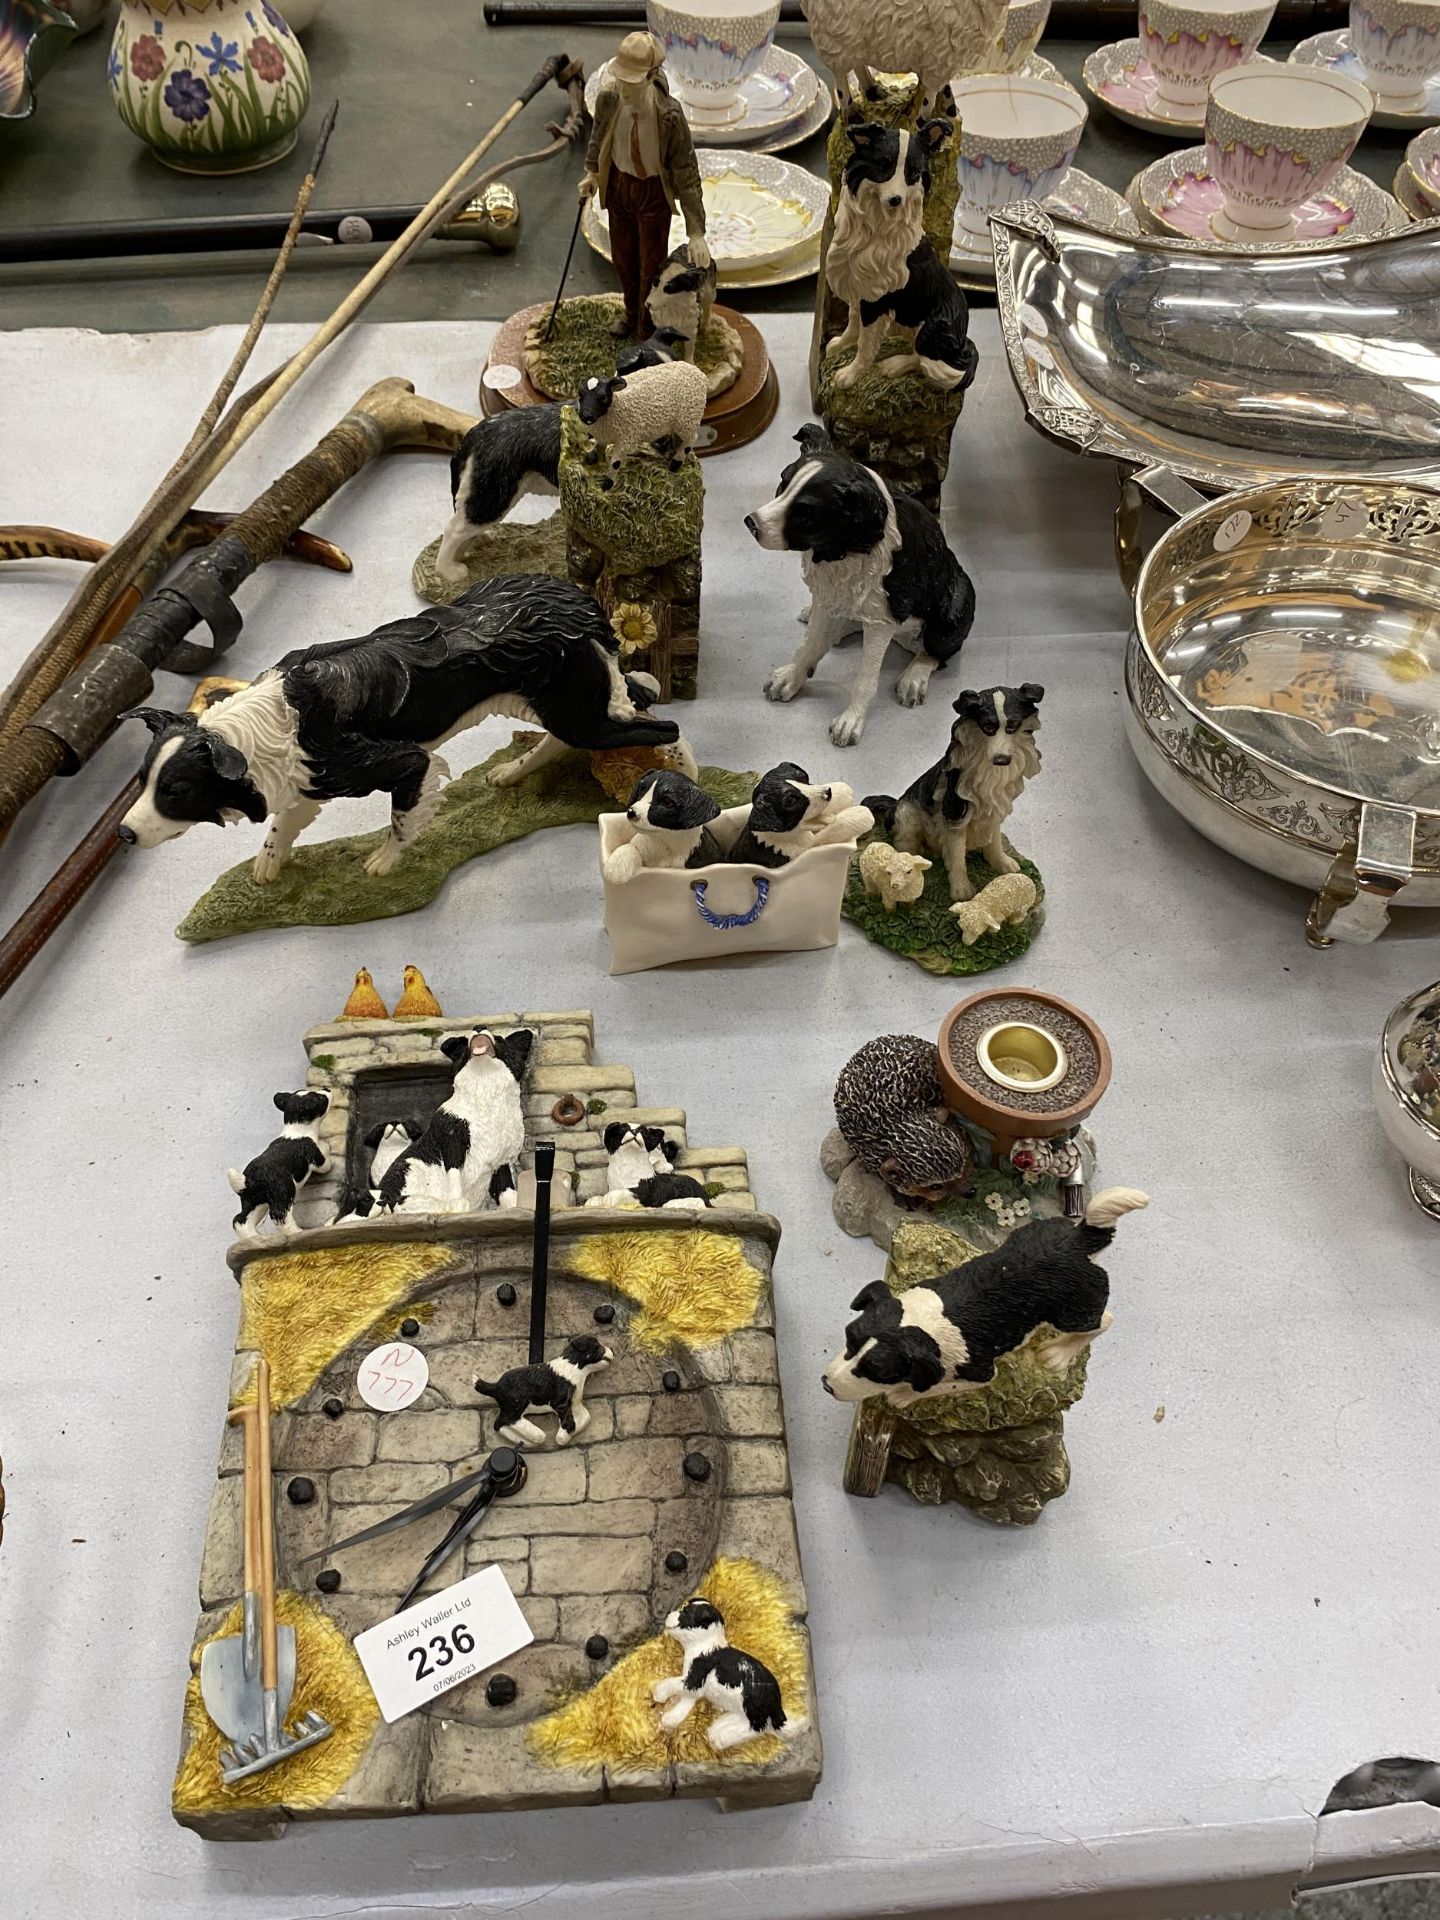 A LARGE QUANTITY OF BORDER COLLIE AND SHEEP FIGURES TO INCLUDE A JAMES HERRIOT WALL CLOCK,